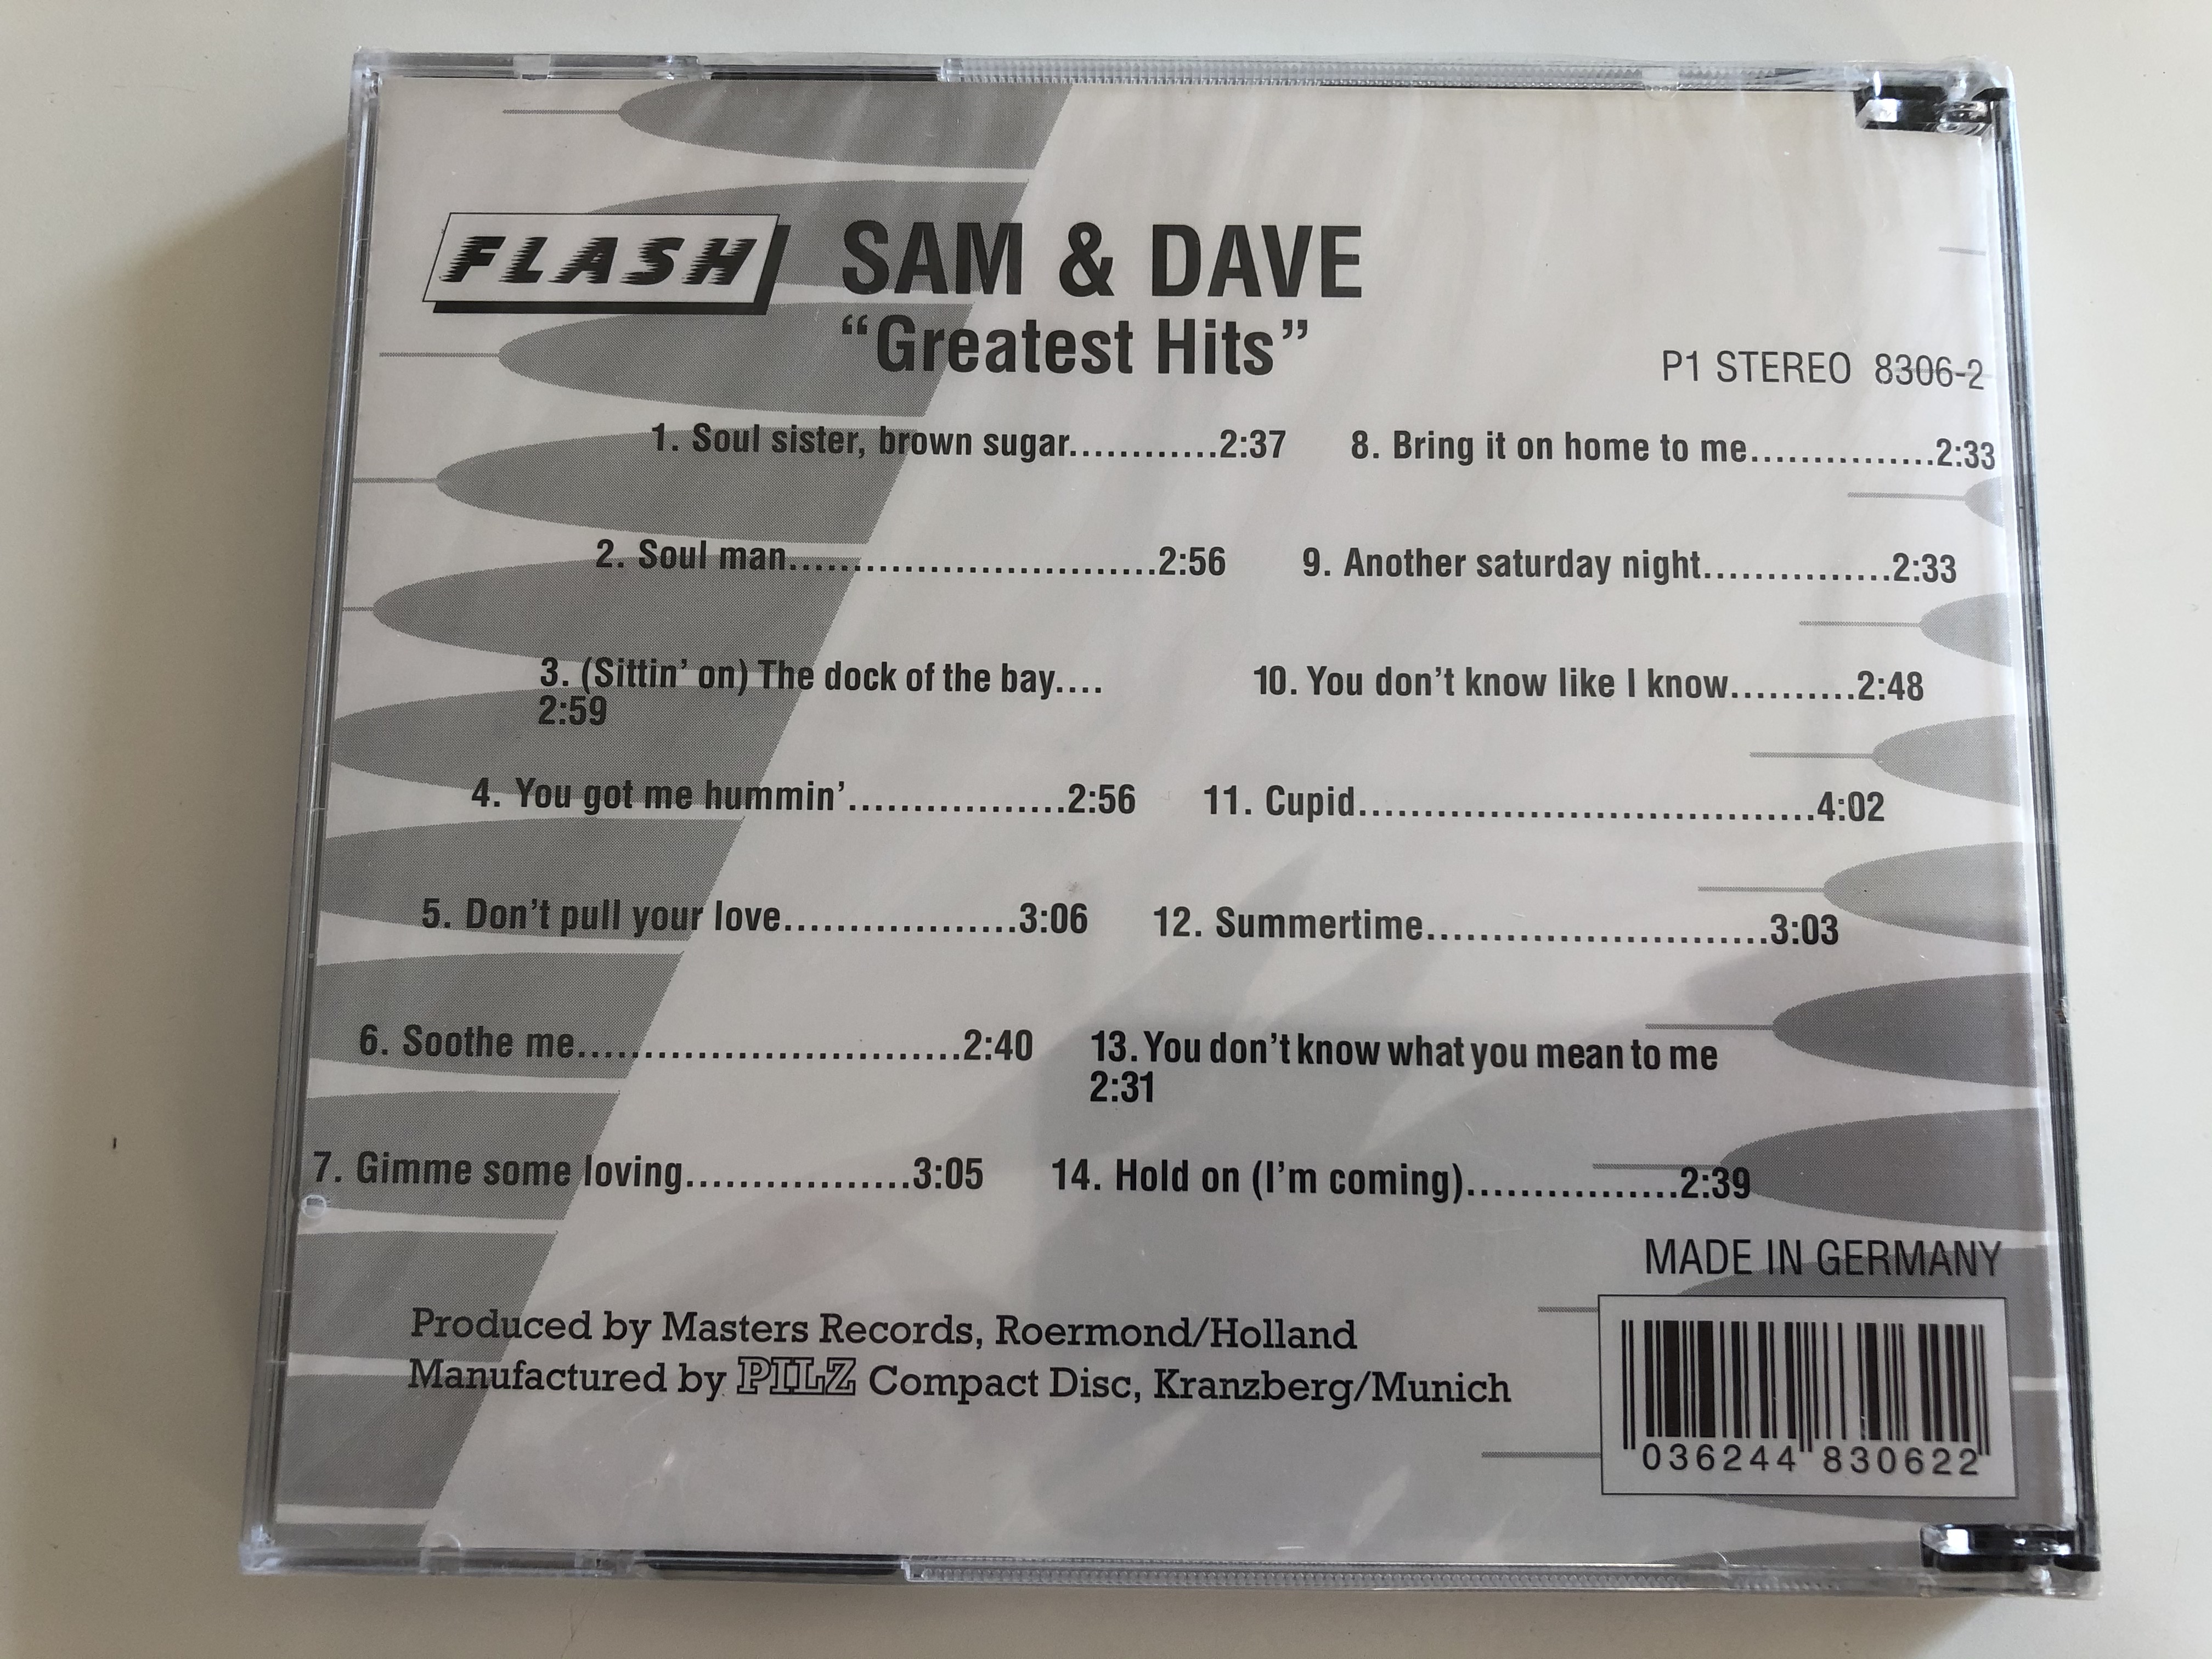 sam-and-dave-greatest-hits-soul-sister-brown-sugar-sittin-on-the-dock-of-the-bay...-you-don-t-know-what-you-mean-to-me-gimme-some-loving-cupid-and-others-flash-audio-cd-stereo-p1-.jpg